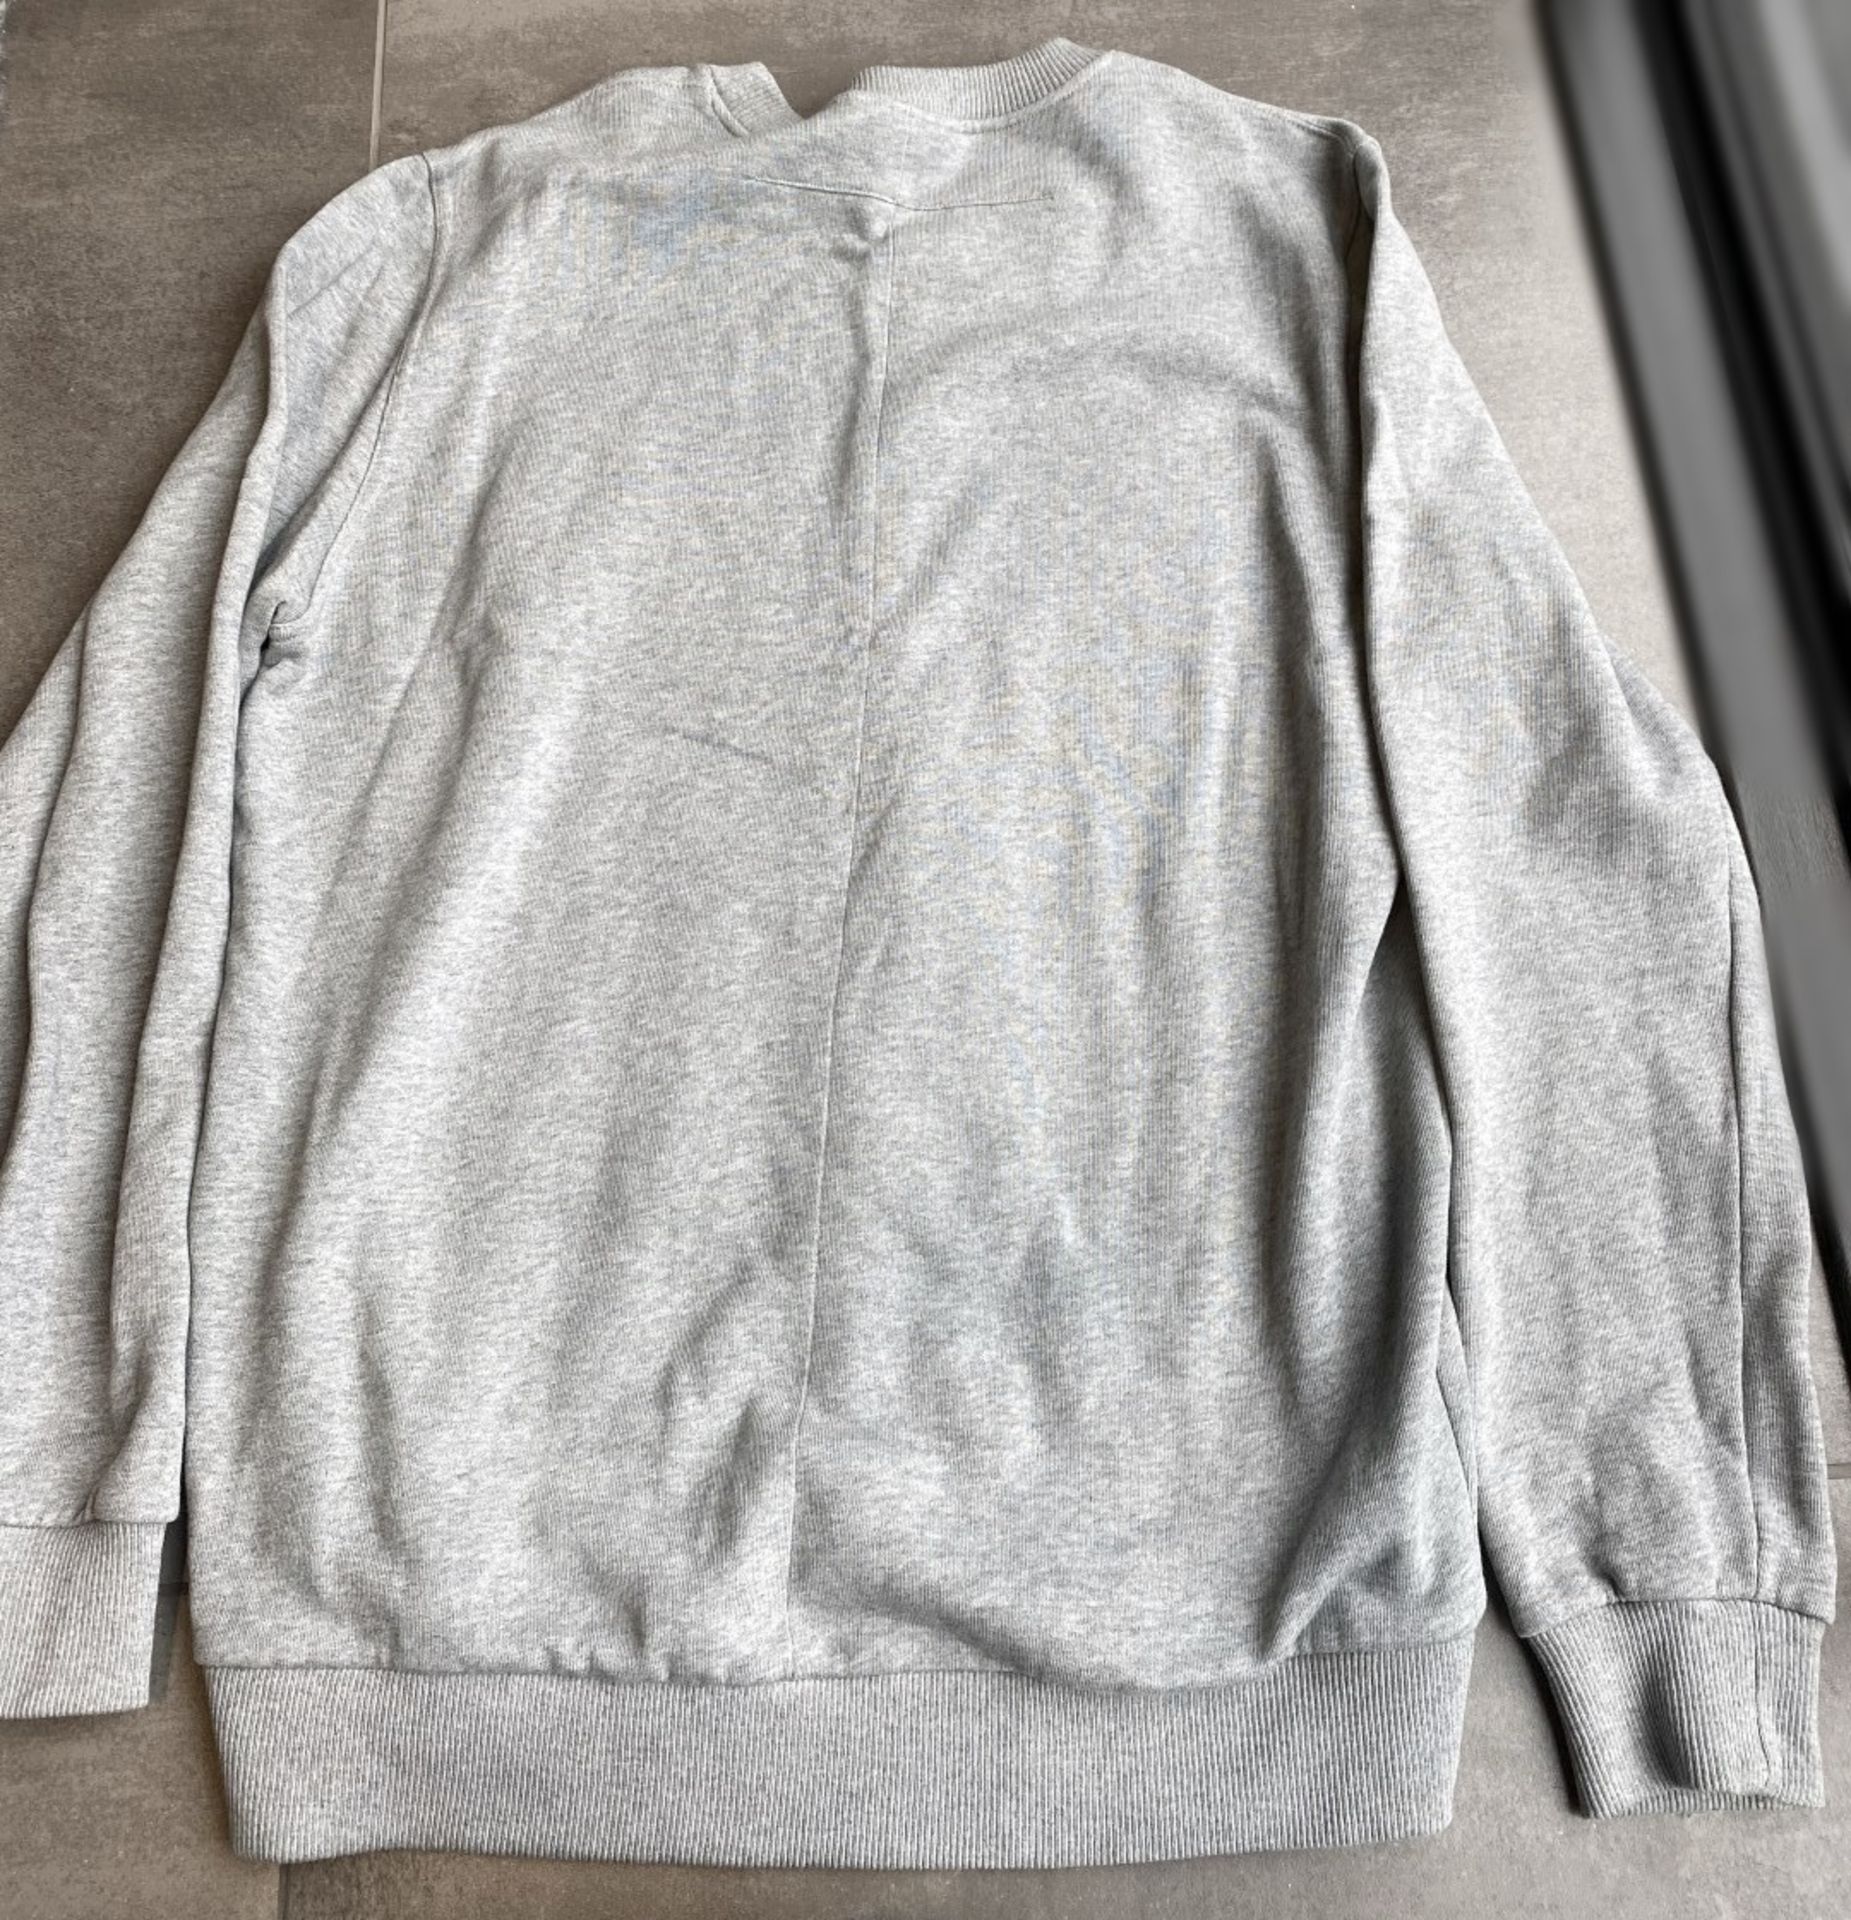 1 x Men's Genuine Givenchy Sweatshirt In Grey With Lambskin Panel On Front With Embroidered Border - Image 3 of 9